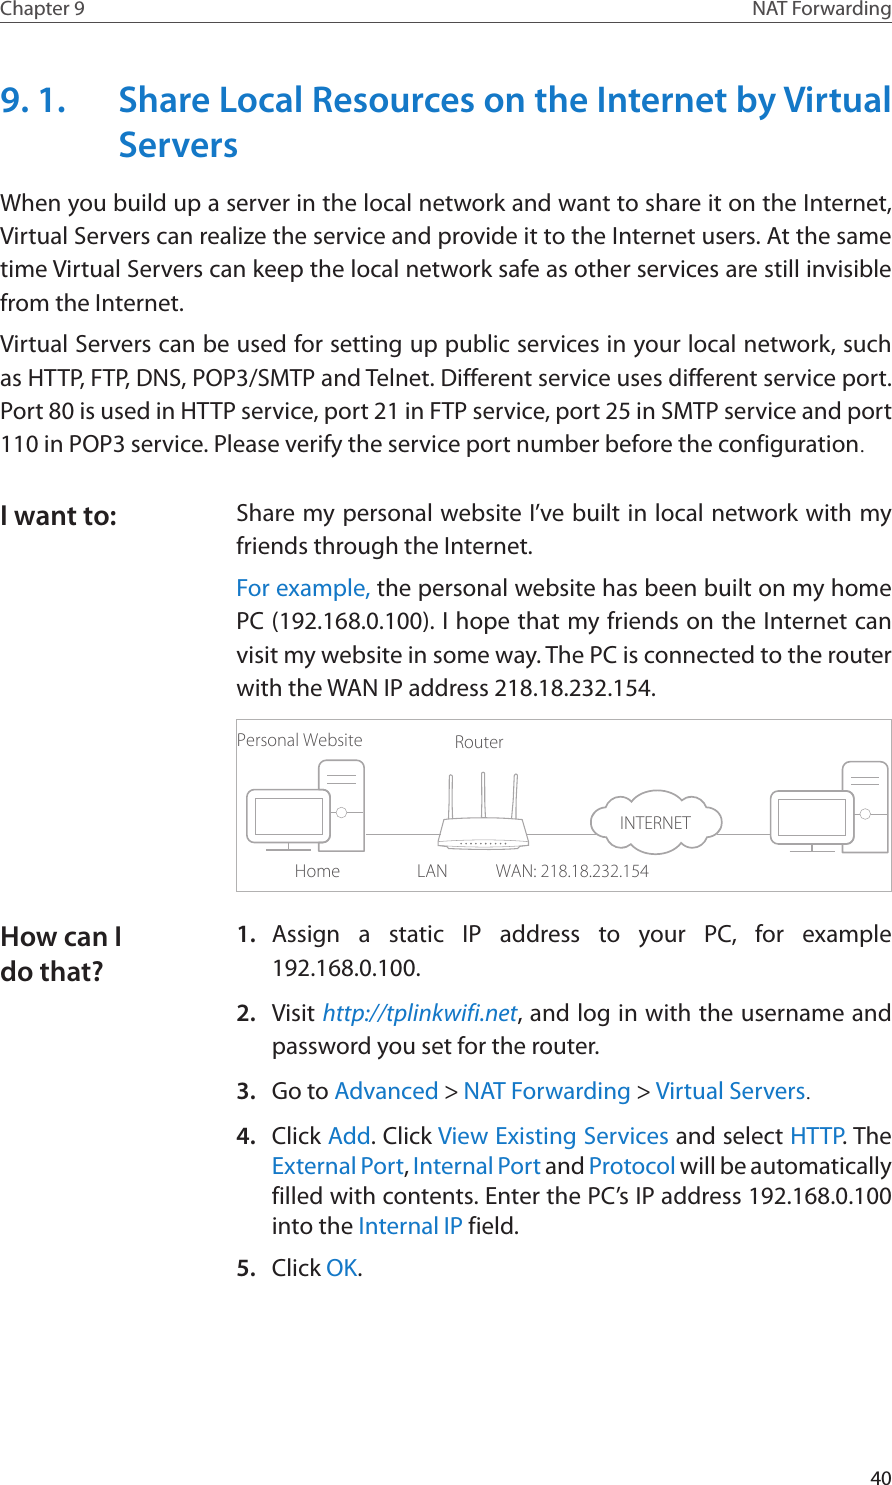 40Chapter 9 NAT Forwarding9. 1.  Share Local Resources on the Internet by Virtual ServersWhen you build up a server in the local network and want to share it on the Internet, Virtual Servers can realize the service and provide it to the Internet users. At the same time Virtual Servers can keep the local network safe as other services are still invisible from the Internet.Virtual Servers can be used for setting up public services in your local network, such as HTTP, FTP, DNS, POP3/SMTP and Telnet. Different service uses different service port. Port 80 is used in HTTP service, port 21 in FTP service, port 25 in SMTP service and port 110 in POP3 service. Please verify the service port number before the configuration.Share my personal website I’ve built in local network with my friends through the Internet.For example, the personal website has been built on my home PC (192.168.0.100). I hope that my friends on the Internet can visit my website in some way. The PC is connected to the router with the WAN IP address 218.18.232.154.Personal WebsiteHomeRouterWAN: 218.18.232.154LAN1.  Assign a static IP address to your PC, for example 192.168.0.100.2.  Visit http://tplinkwifi.net, and log in with the username and password you set for the router.3.  Go to Advanced &gt; NAT Forwarding &gt; Virtual Servers.4.  Click Add. Click View Existing Services and select HTTP. The External Port, Internal Port and Protocol will be automatically filled with contents. Enter the PC’s IP address 192.168.0.100 into the Internal IP field.5.  Click OK.I want to:How can I do that?INTERNET